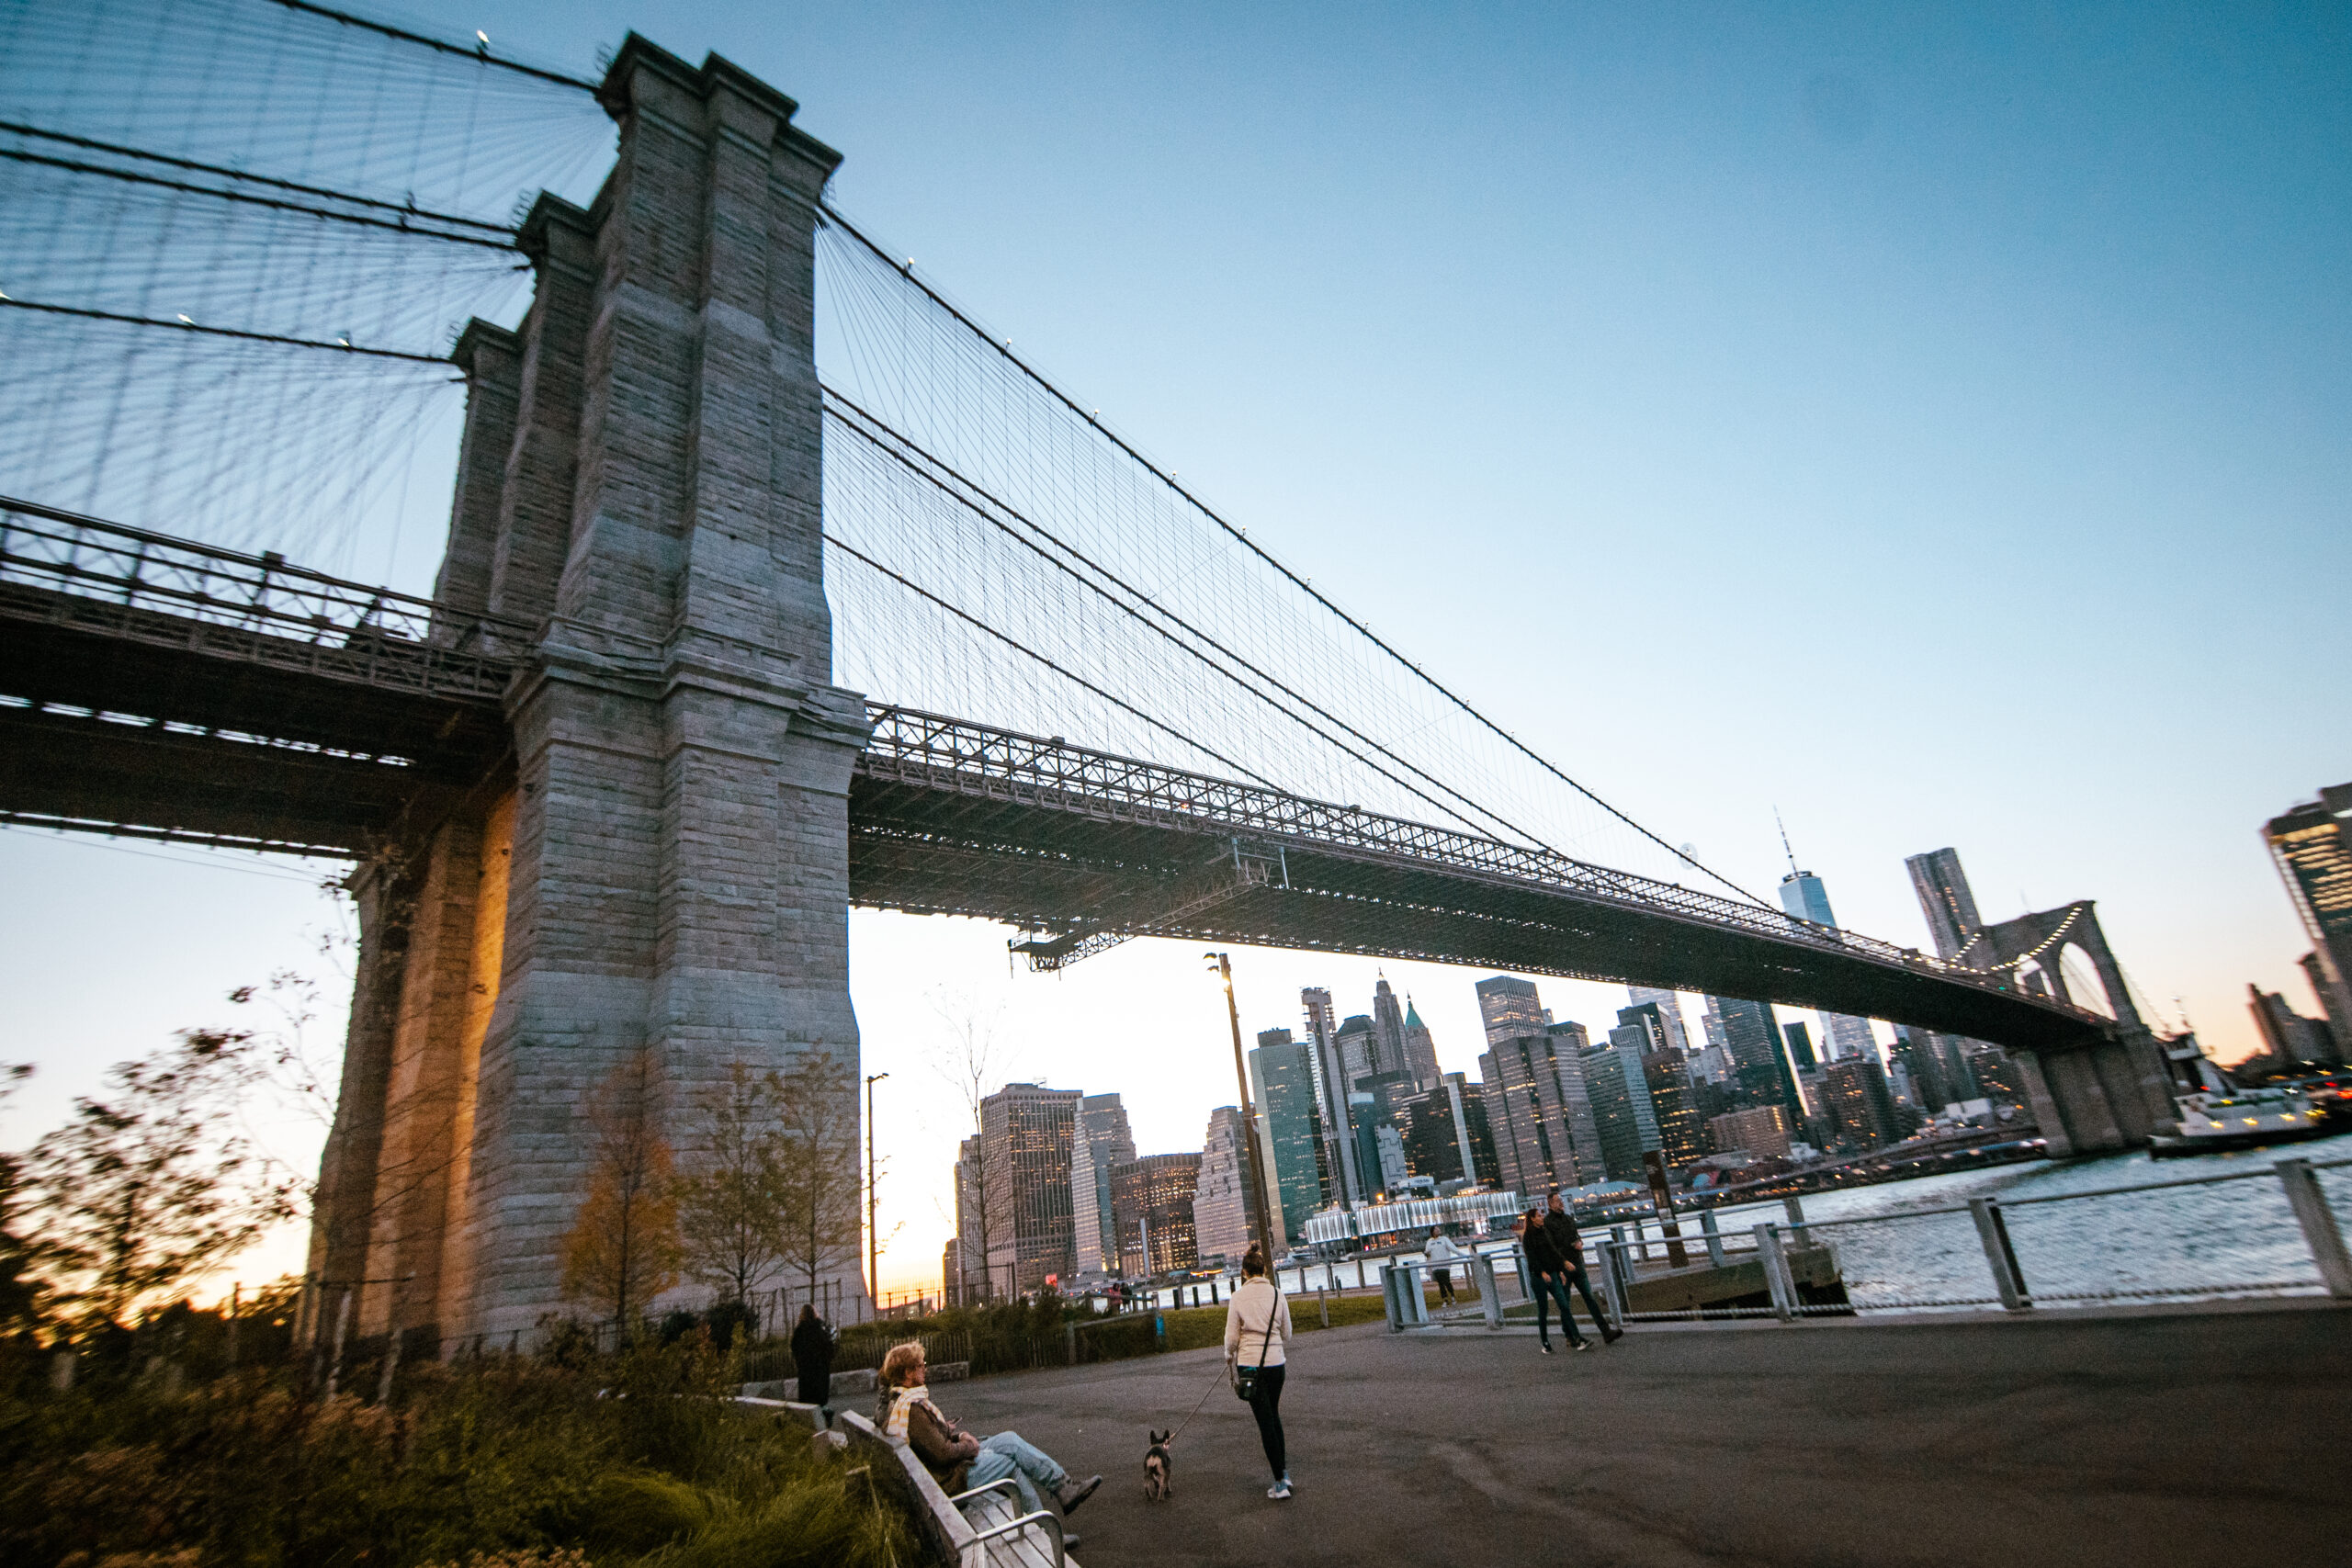 About 560,000 square feet of granite and other masonry on the Brooklyn Bridge was cleaned during a 2020-2023 restoration.